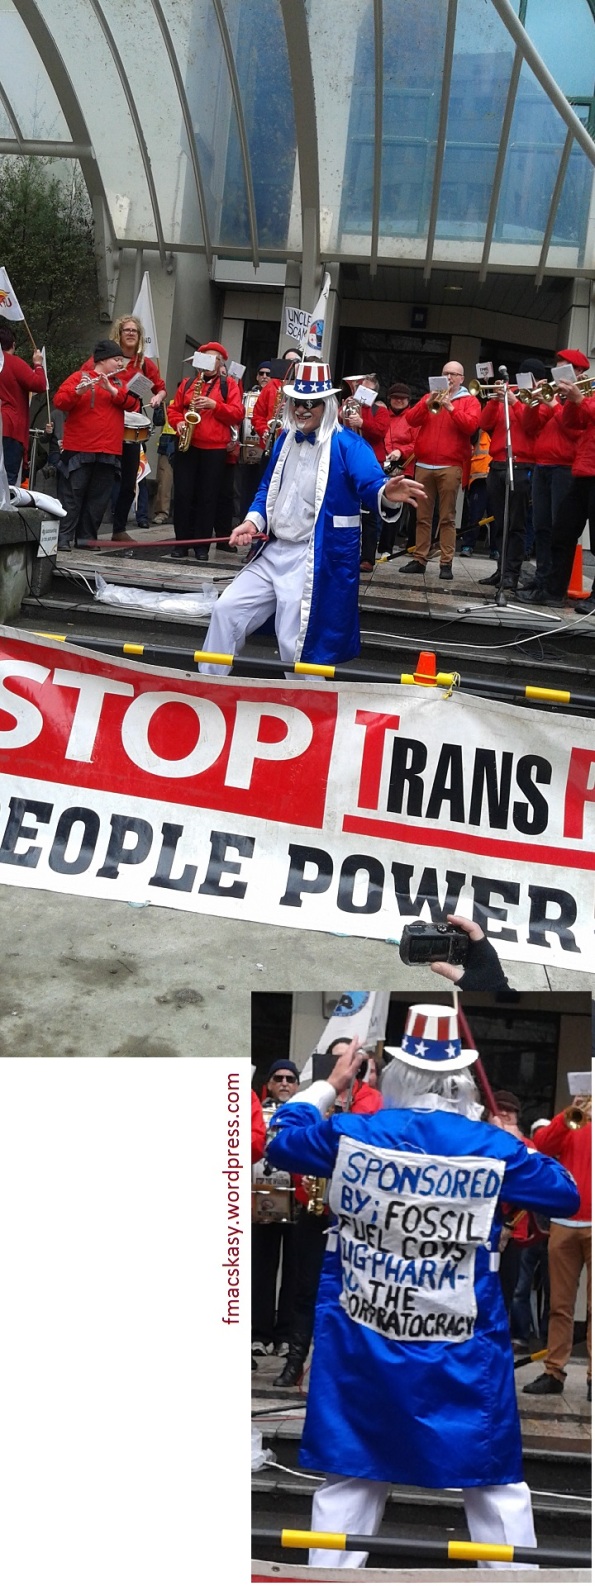 TPPA - trans pacific partnership agreement - protest march - wellington - 15 august 2015